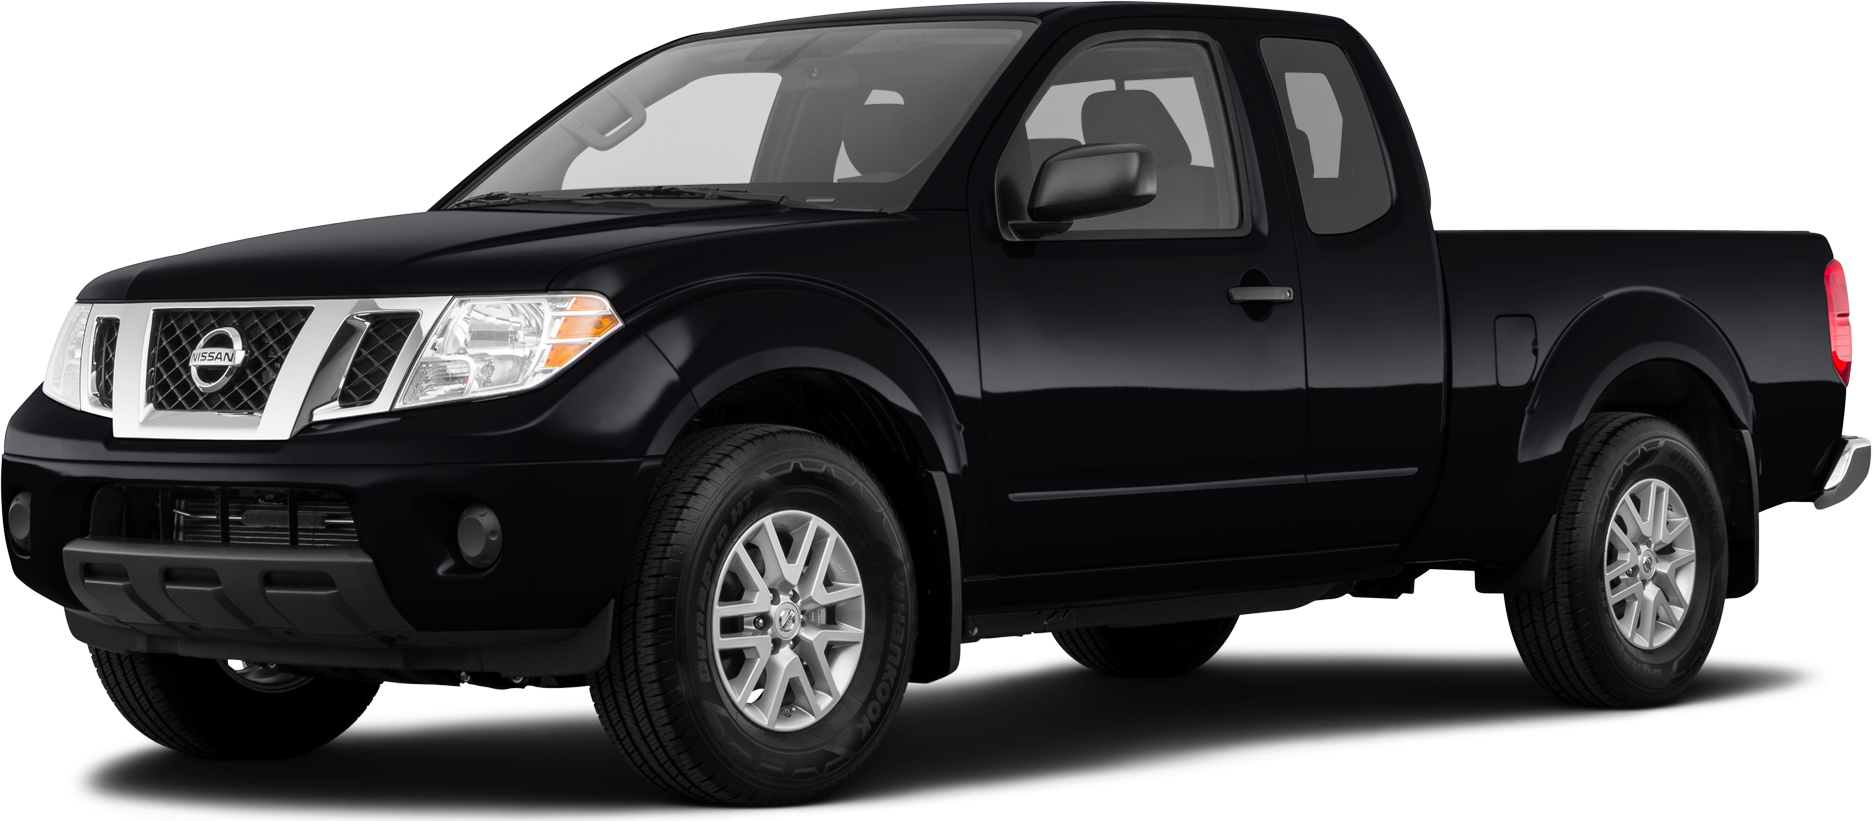 2020 Nissan Frontier Price, Value, Ratings & Reviews Kelley Blue Book